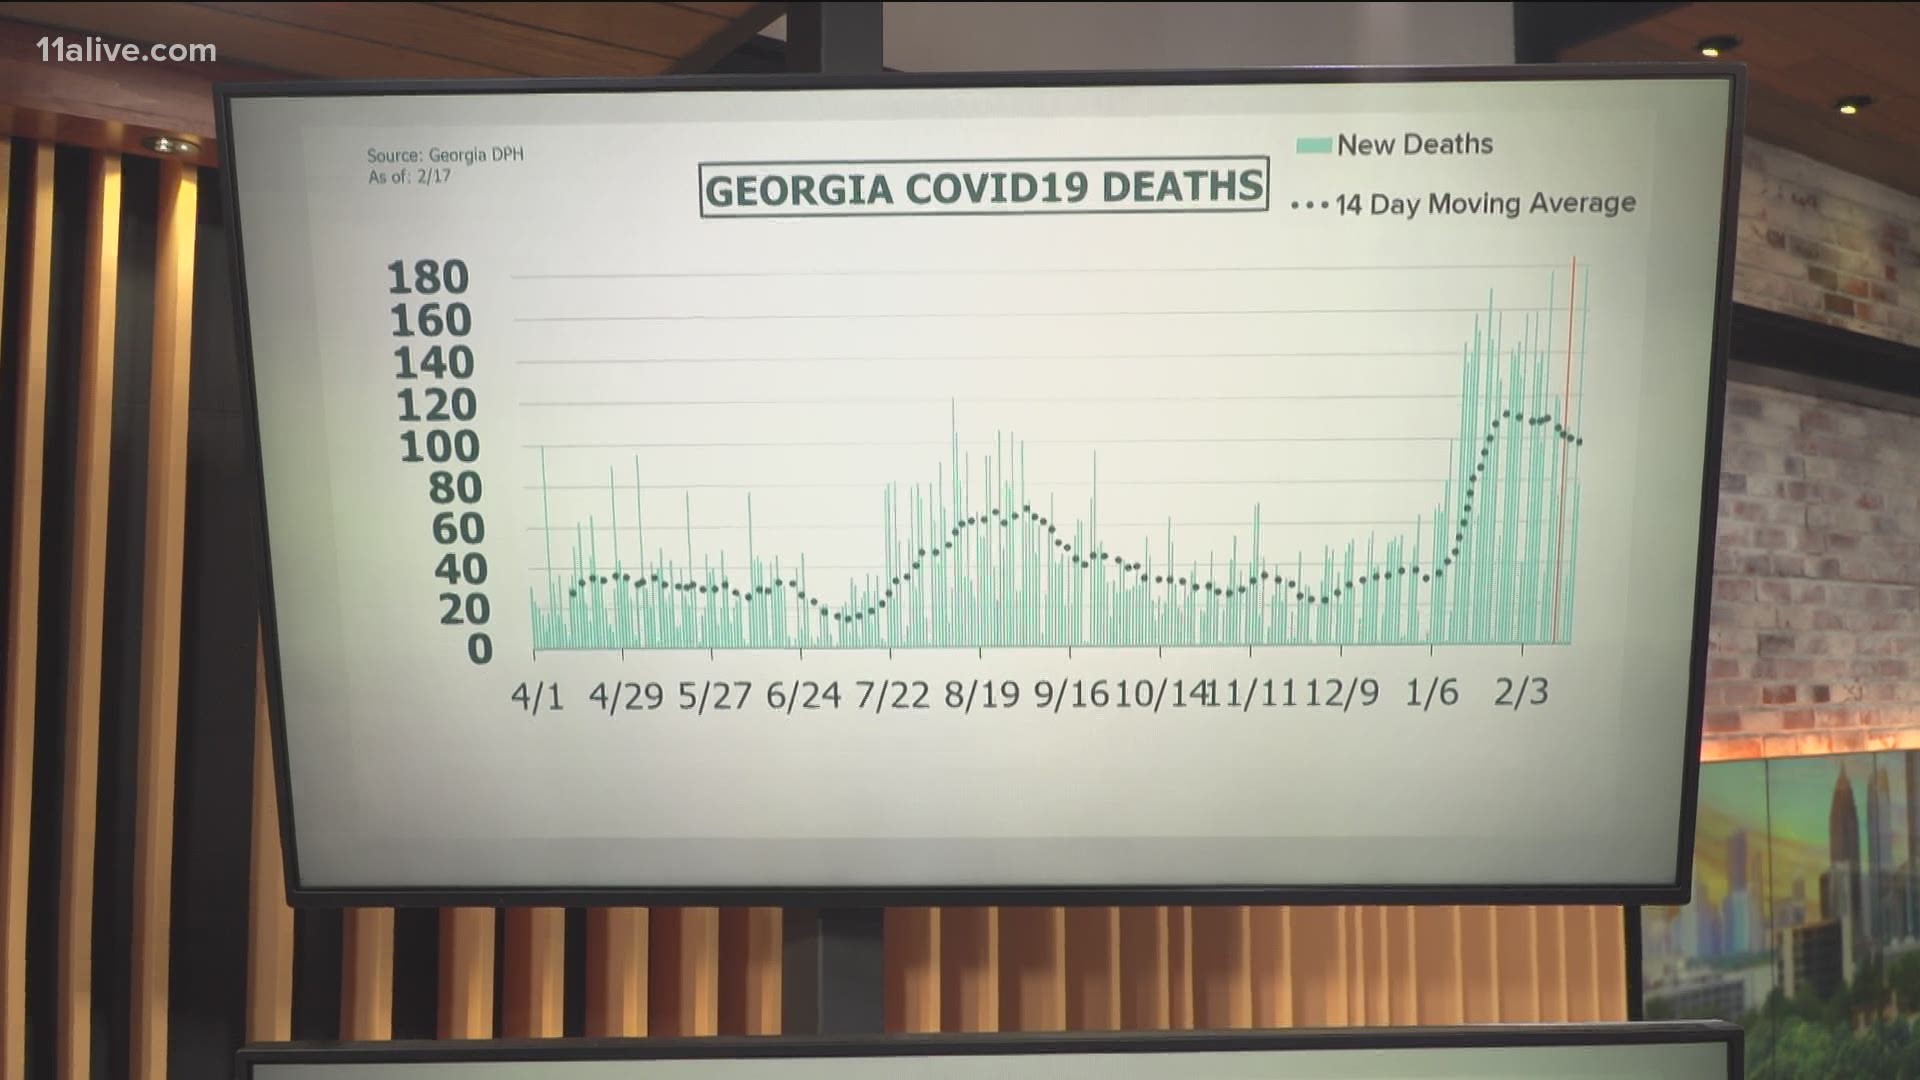 Deaths have been elevated in recent weeks following a record surge in cases last month.